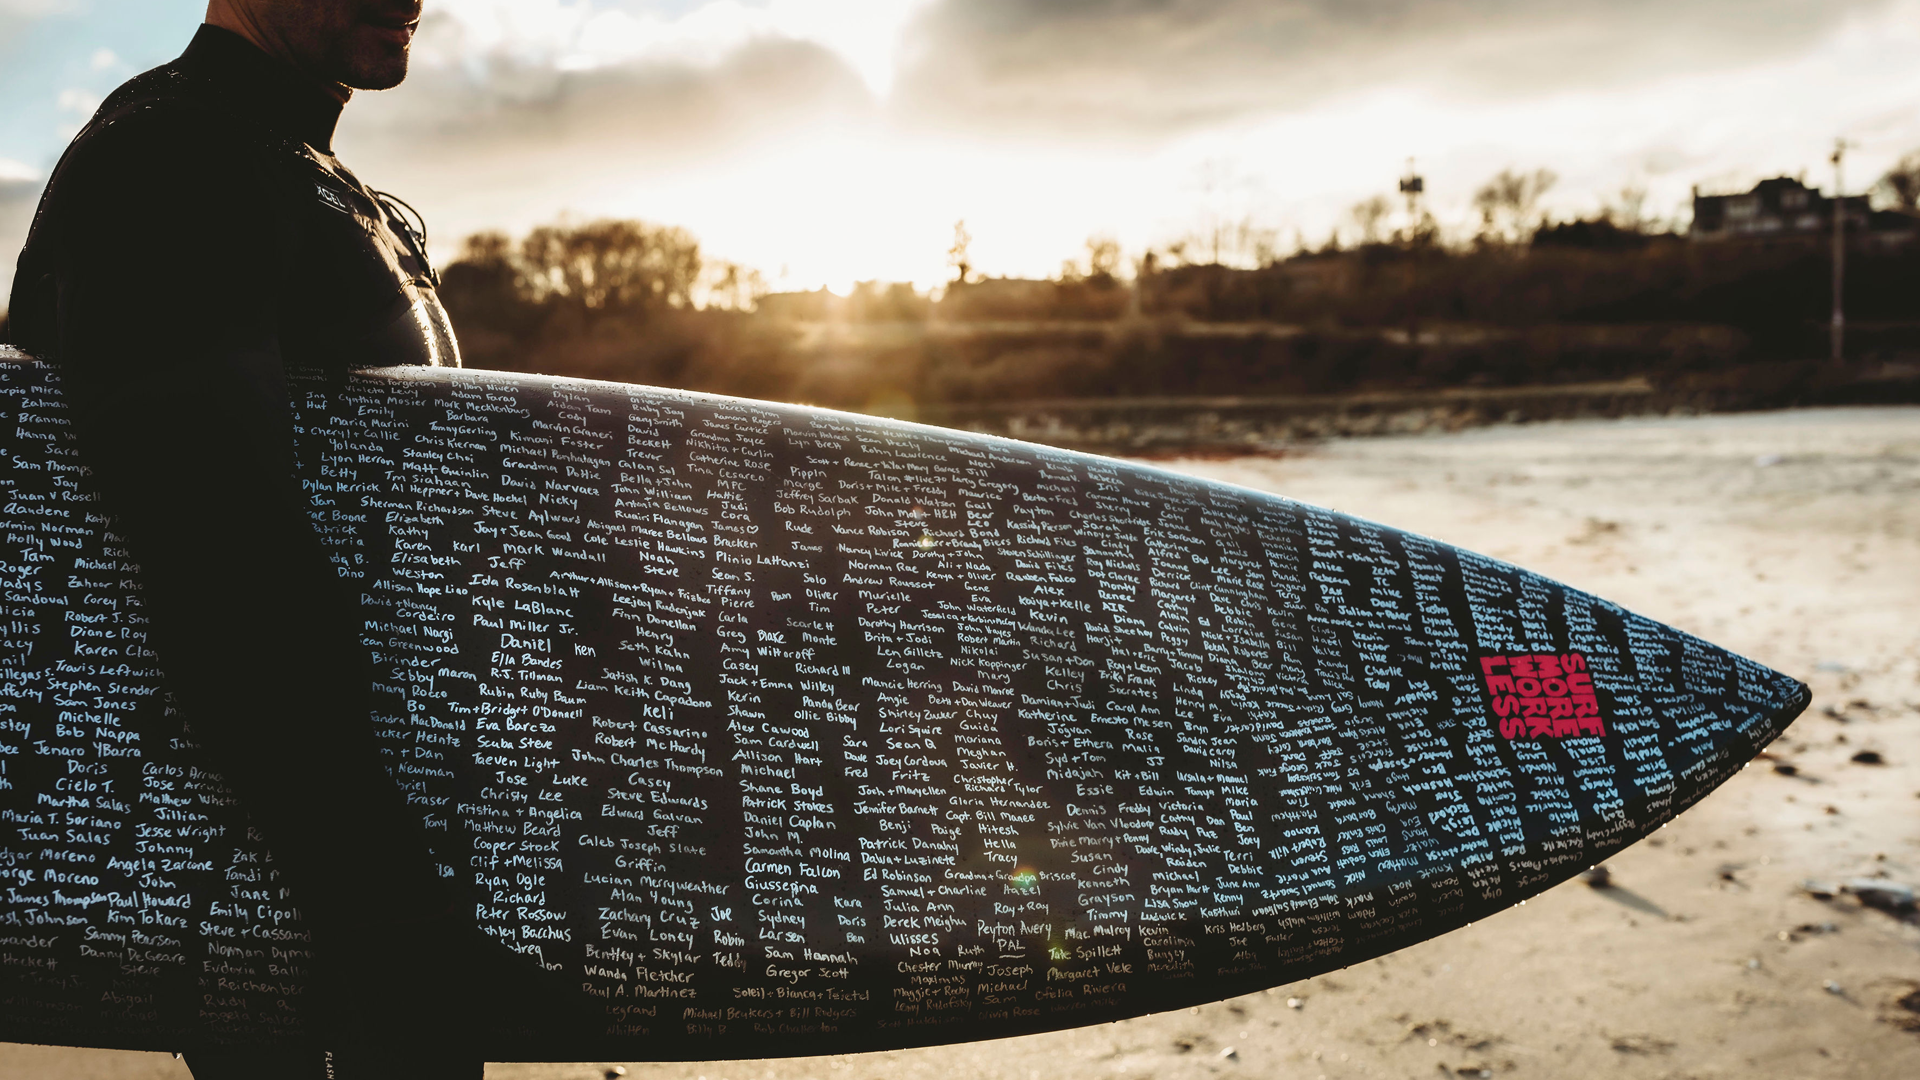 Surfer’s Tribute Gives Lost Loved Ones a ‘Last Wave’